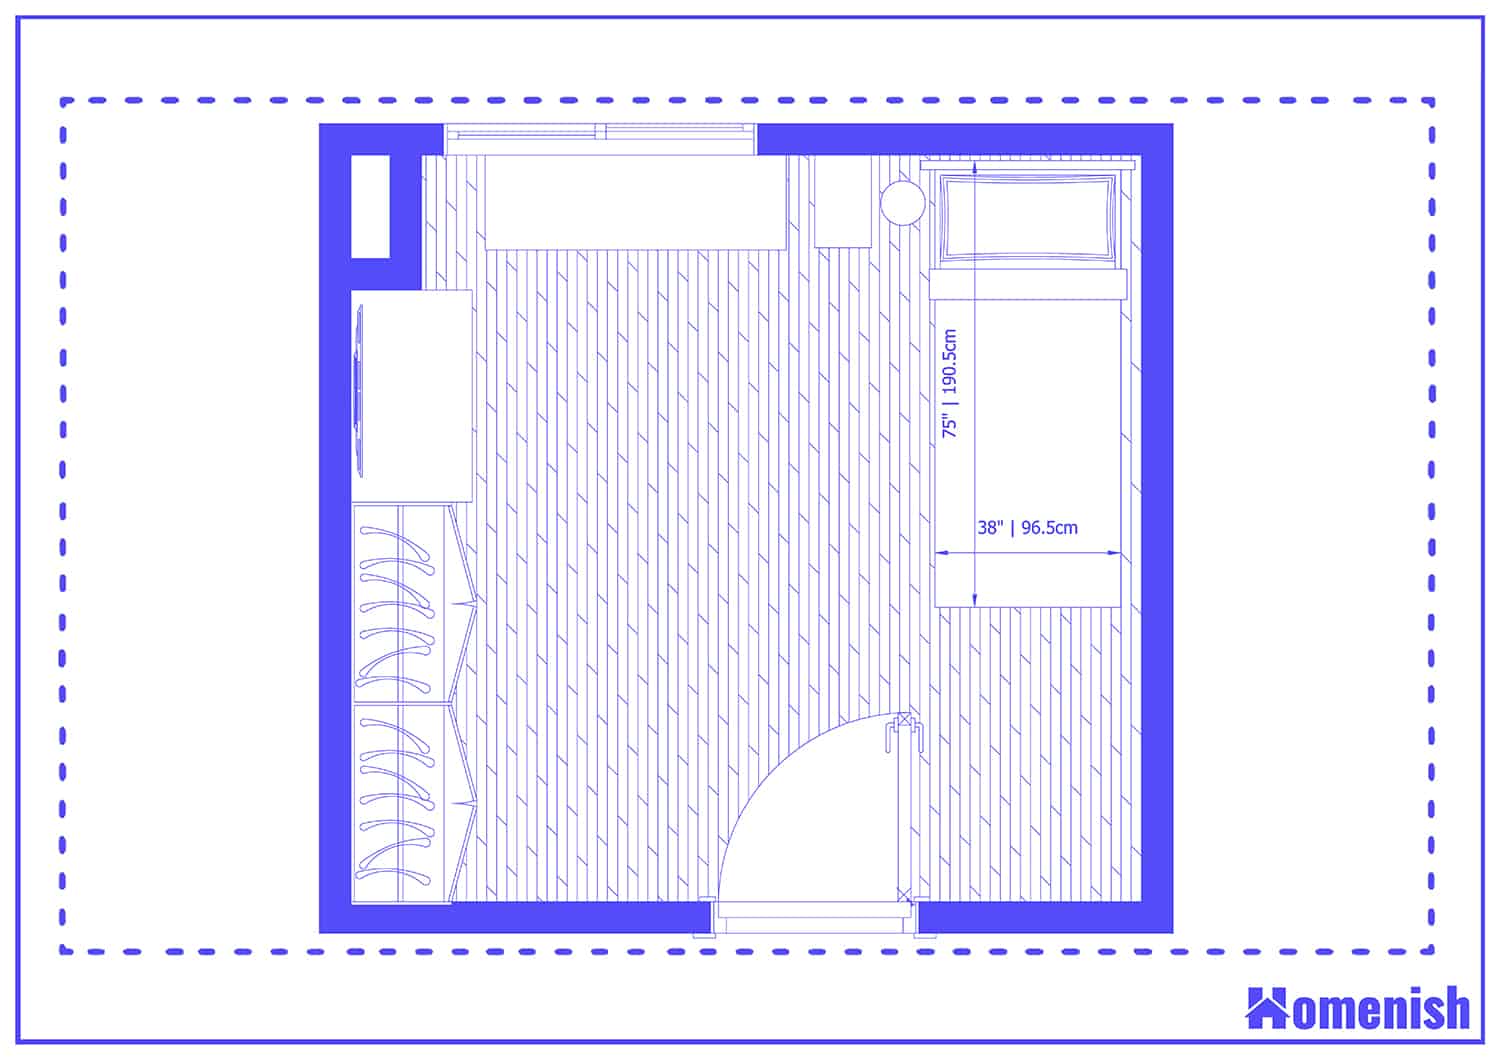 Care Facility Bedroom with a Desk Floor Plan